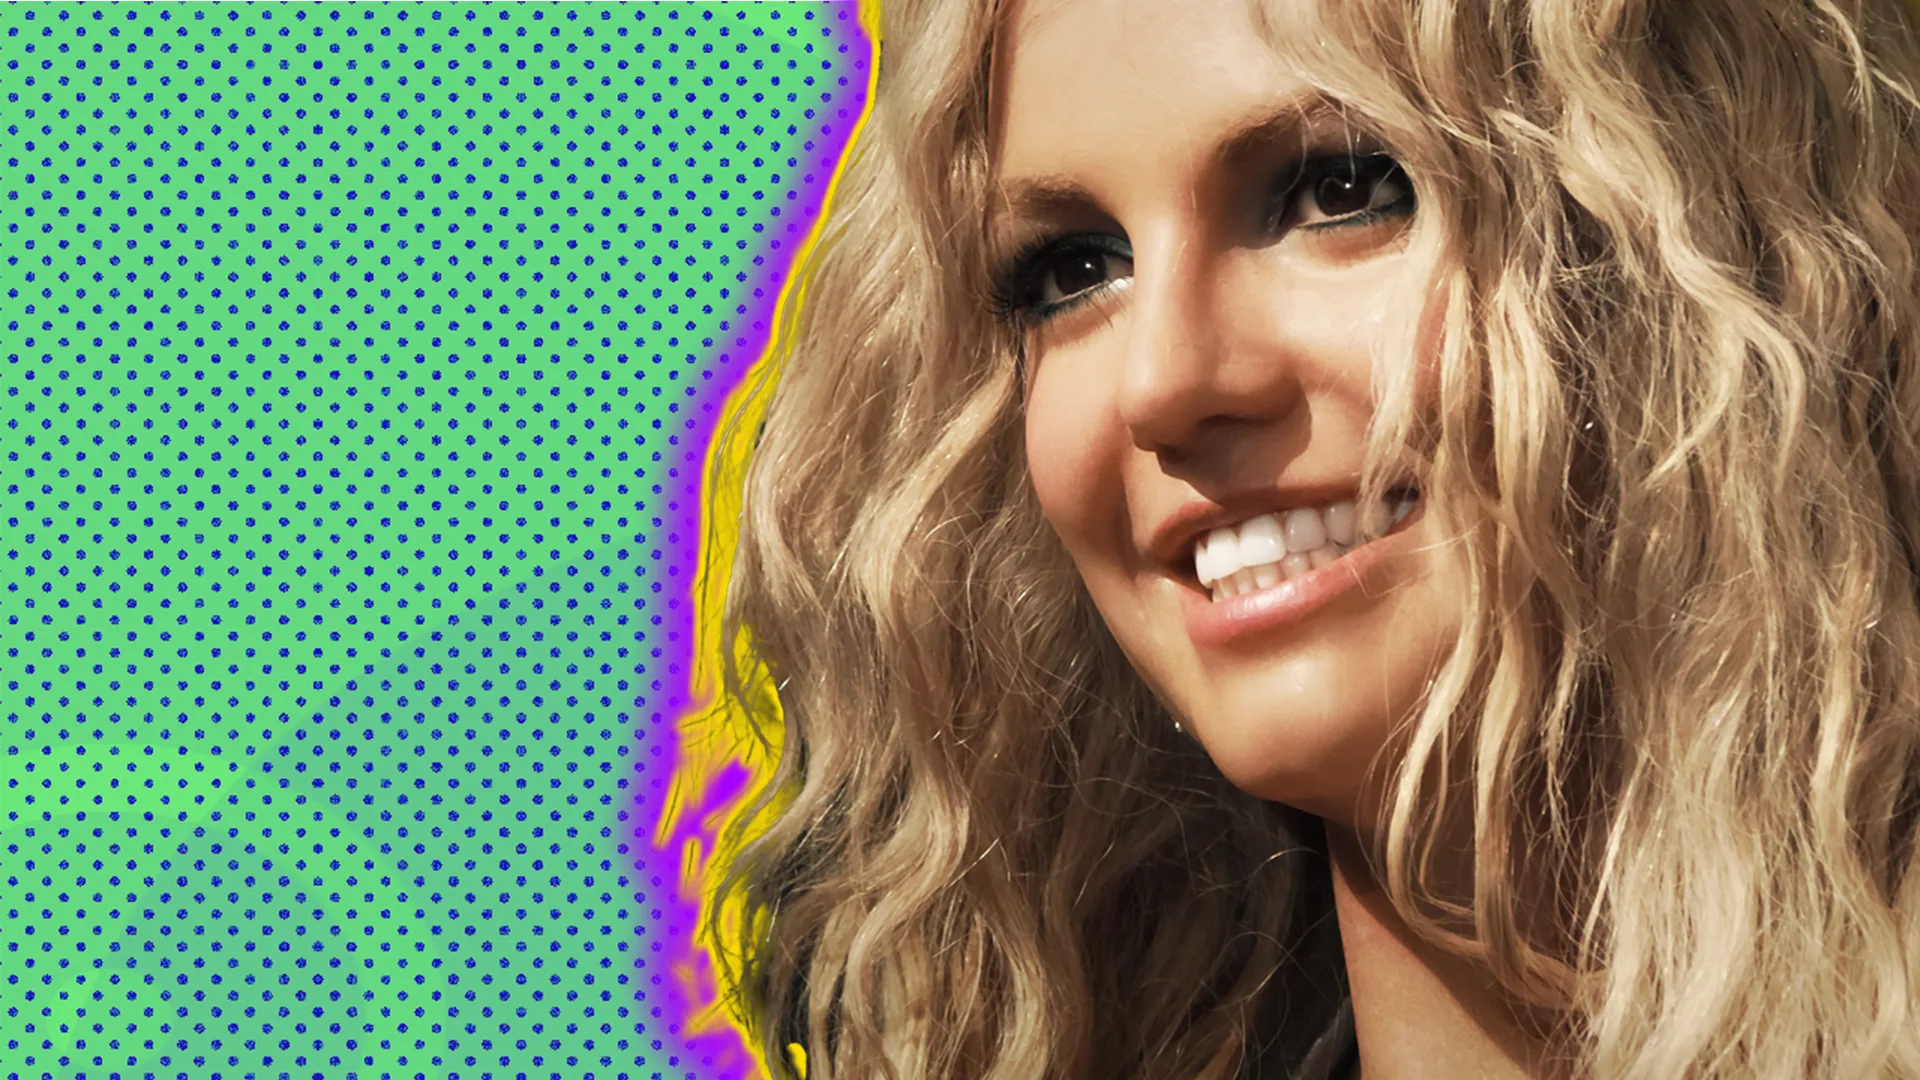 Britney Spears smiling against a green dotted background with a purple halo effect